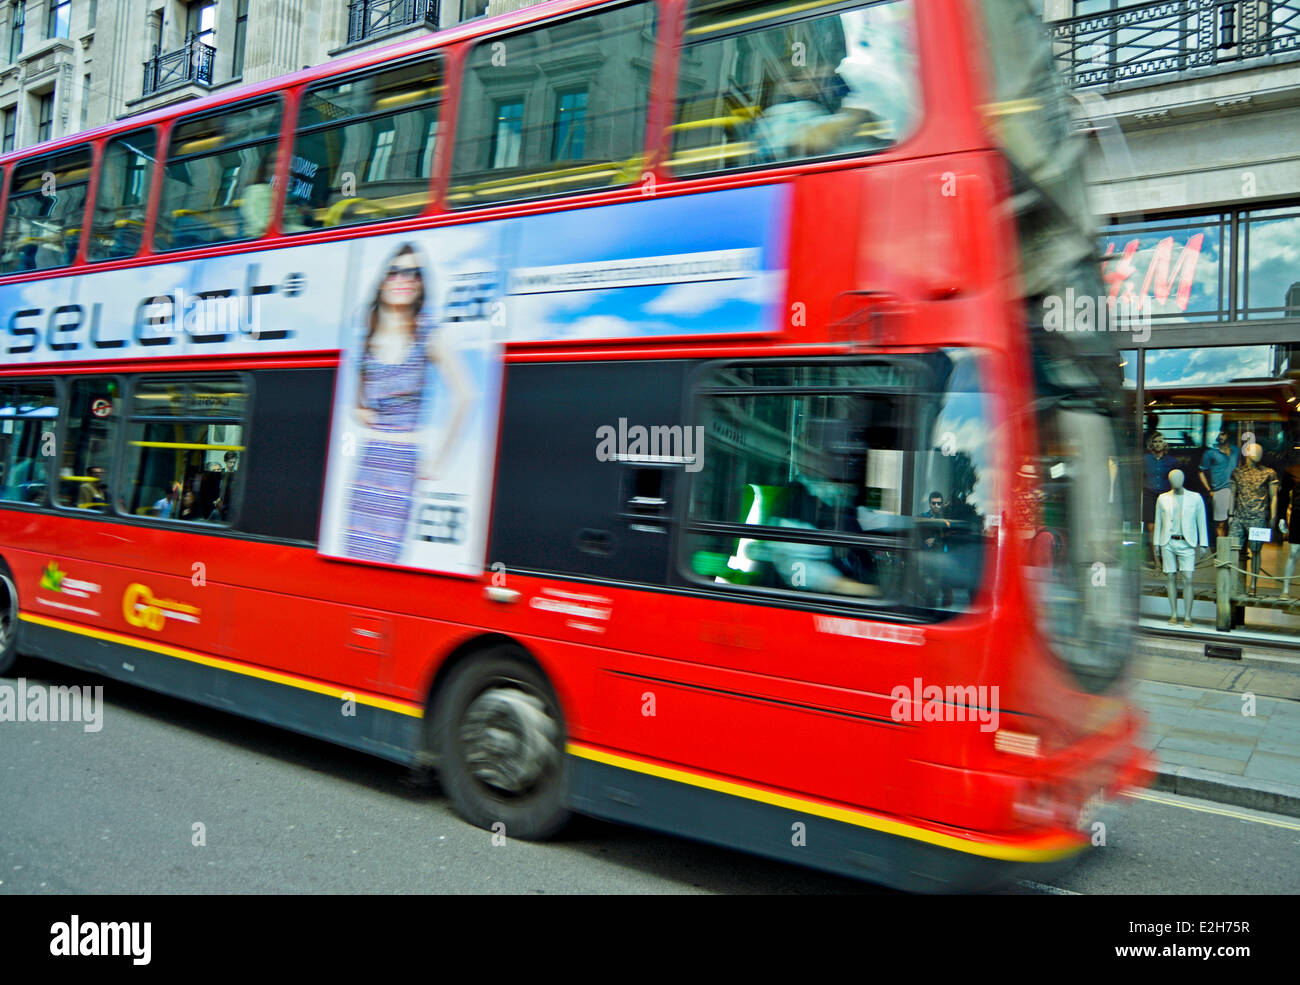 Red double-decker bus in transit on Regent Street, City of Westminster, London, England, United Kingdom Stock Photo